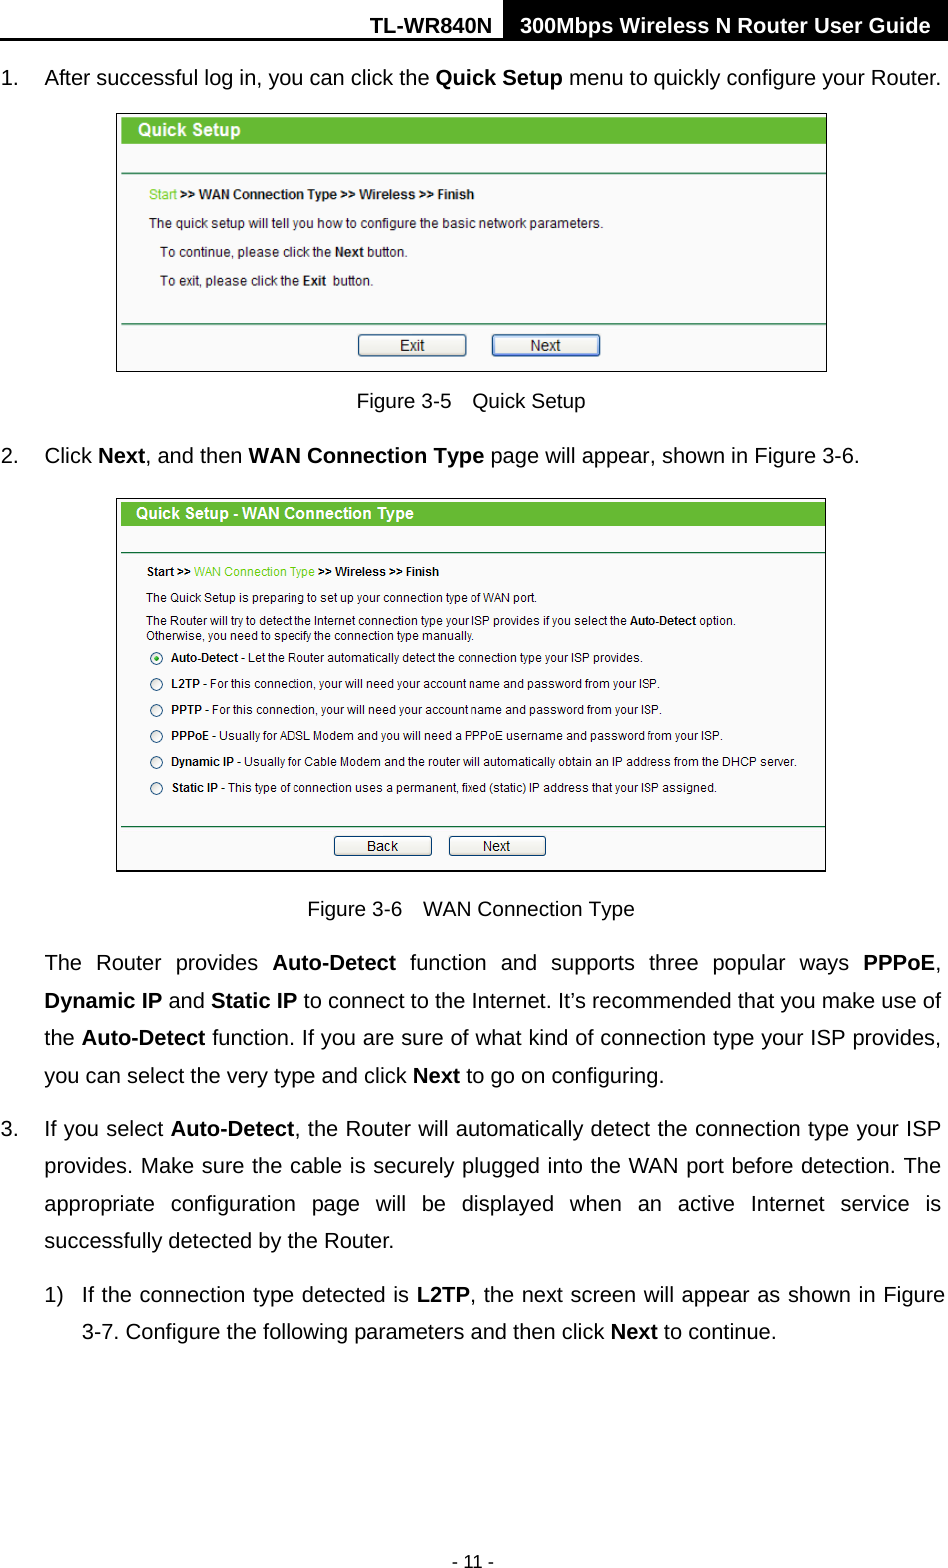 TL-WR840N 300Mbps Wireless N Router User Guide  - 11 - 1. After successful log in, you can click the Quick Setup menu to quickly configure your Router.    Figure 3-5    Quick Setup 2. Click Next, and then WAN Connection Type page will appear, shown in Figure 3-6.  Figure 3-6    WAN Connection Type The  Router provides  Auto-Detect function and supports three popular ways PPPoE, Dynamic IP and Static IP to connect to the Internet. It’s recommended that you make use of the Auto-Detect function. If you are sure of what kind of connection type your ISP provides, you can select the very type and click Next to go on configuring. 3. If you select Auto-Detect, the Router will automatically detect the connection type your ISP provides. Make sure the cable is securely plugged into the WAN port before detection. The appropriate configuration page will be displayed when an active Internet service is successfully detected by the Router. 1)  If the connection type detected is L2TP, the next screen will appear as shown in Figure 3-7. Configure the following parameters and then click Next to continue. 